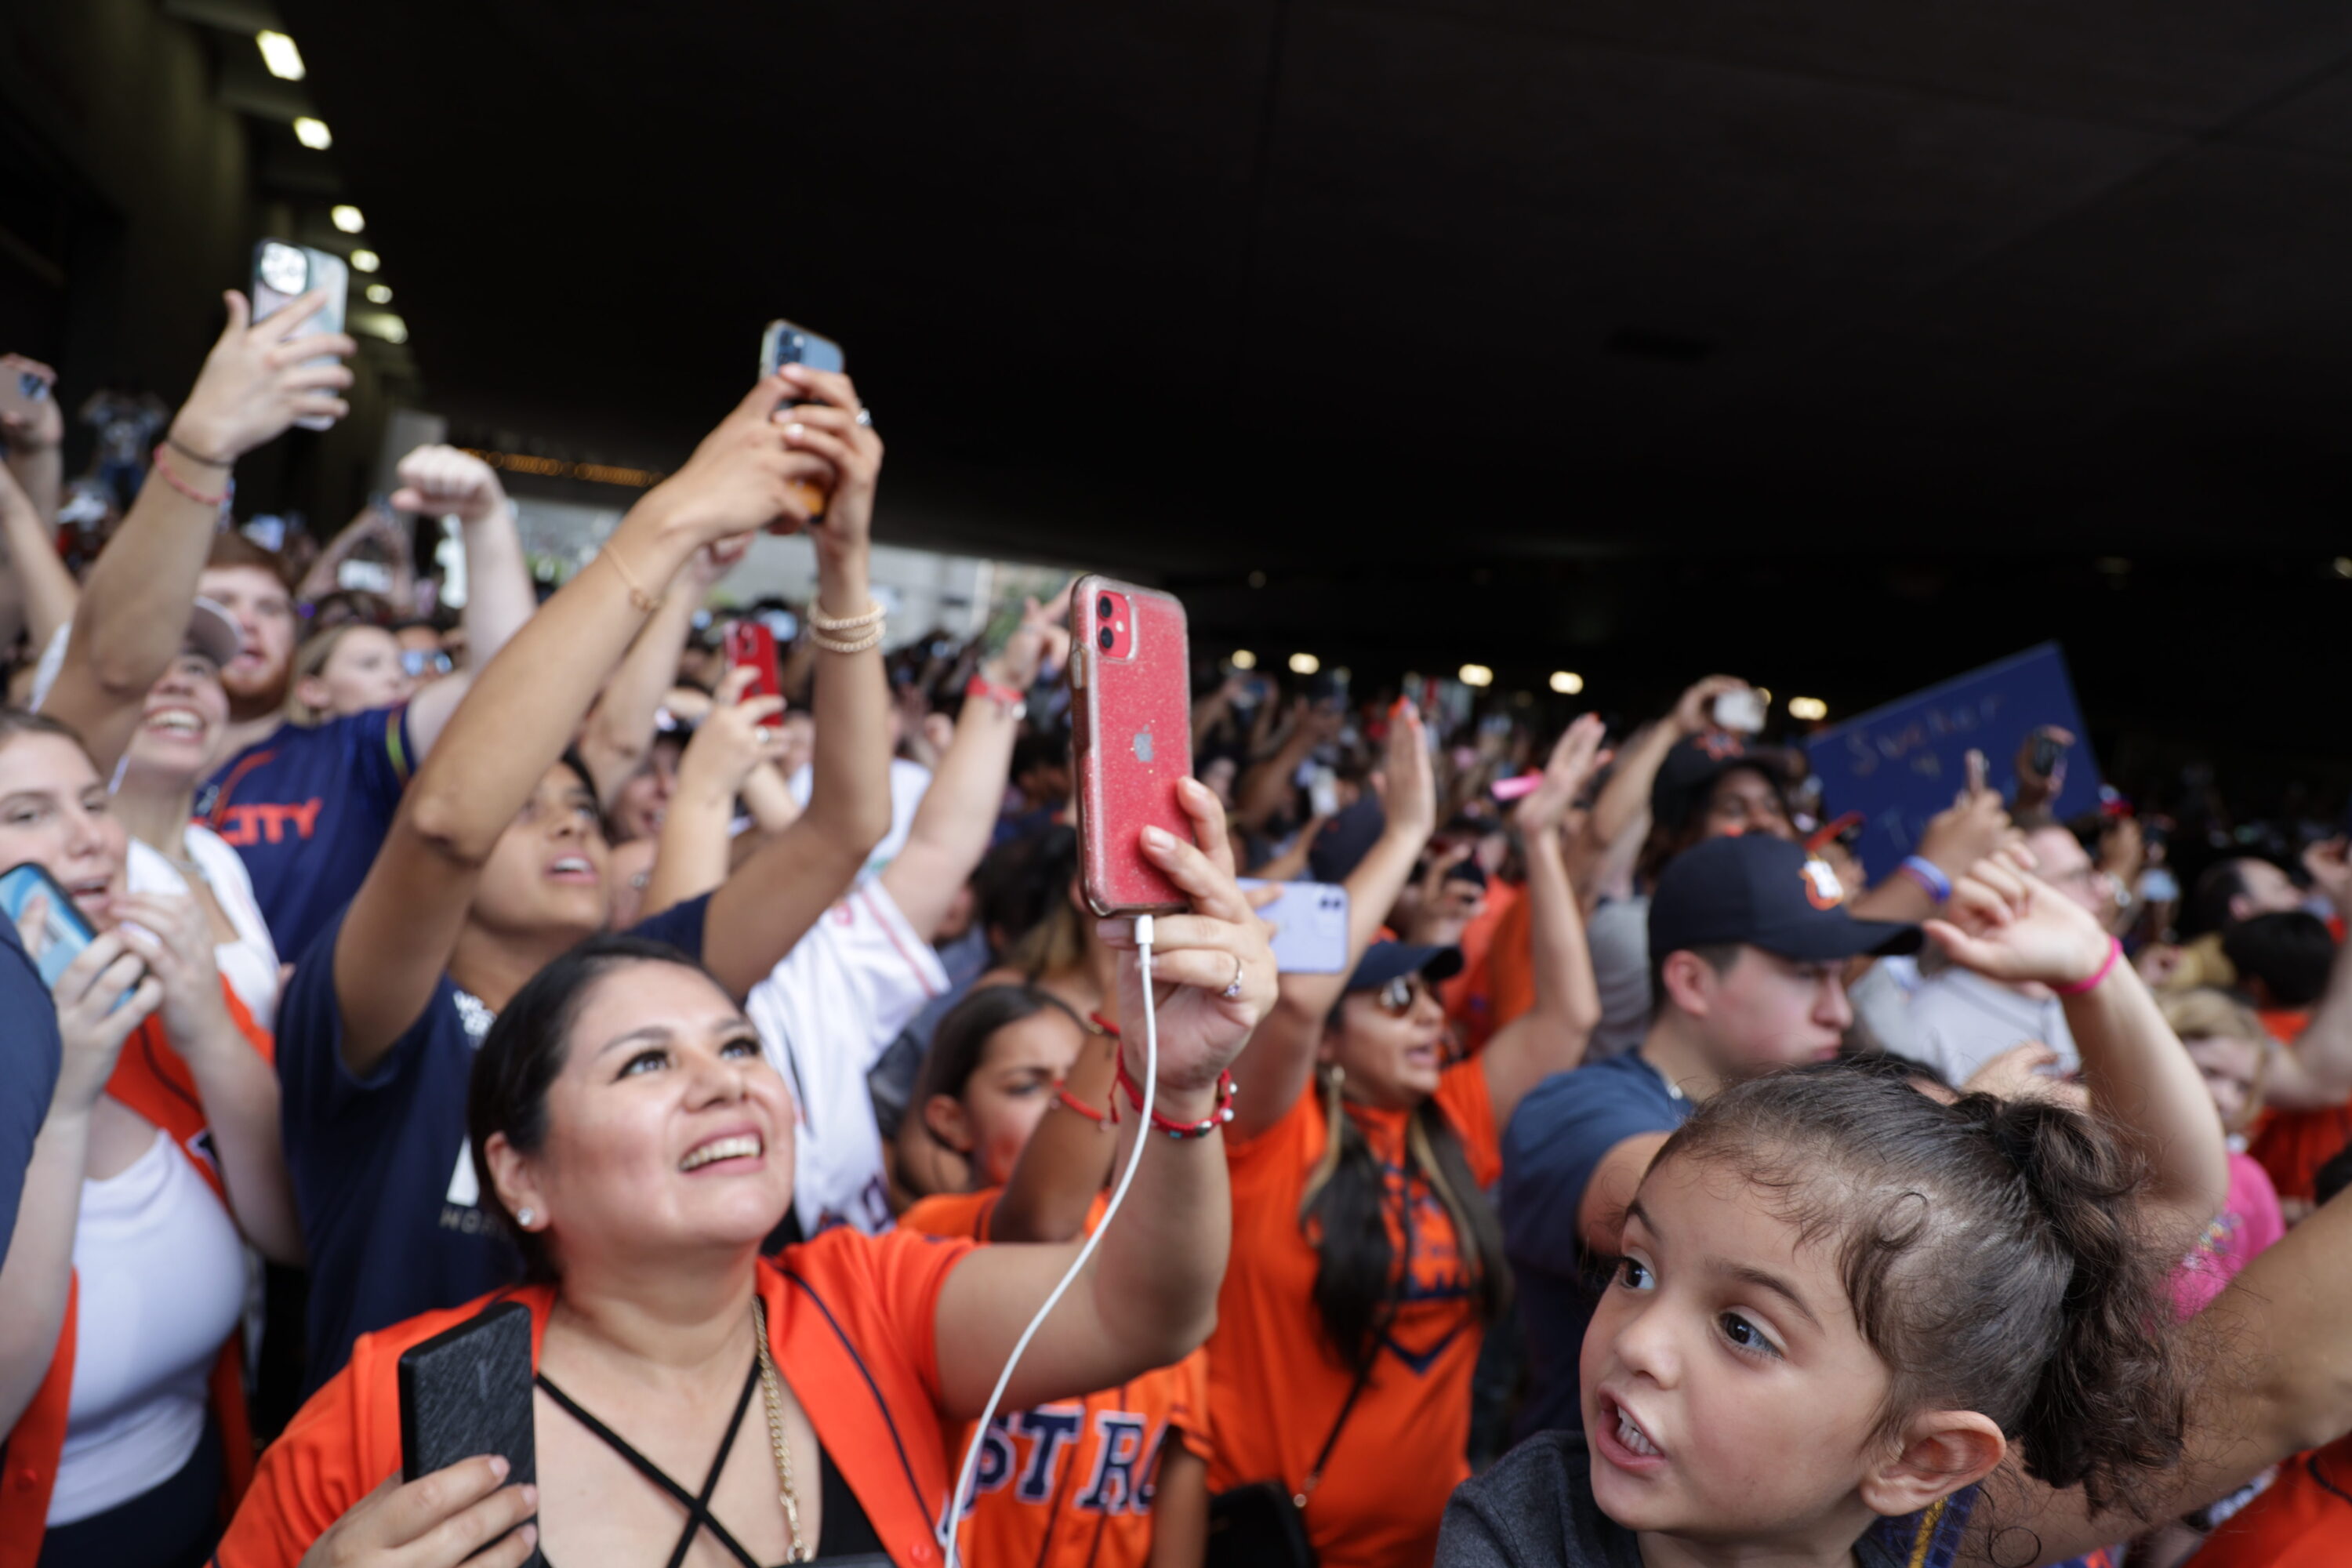 How many people were at the Astros parade today?